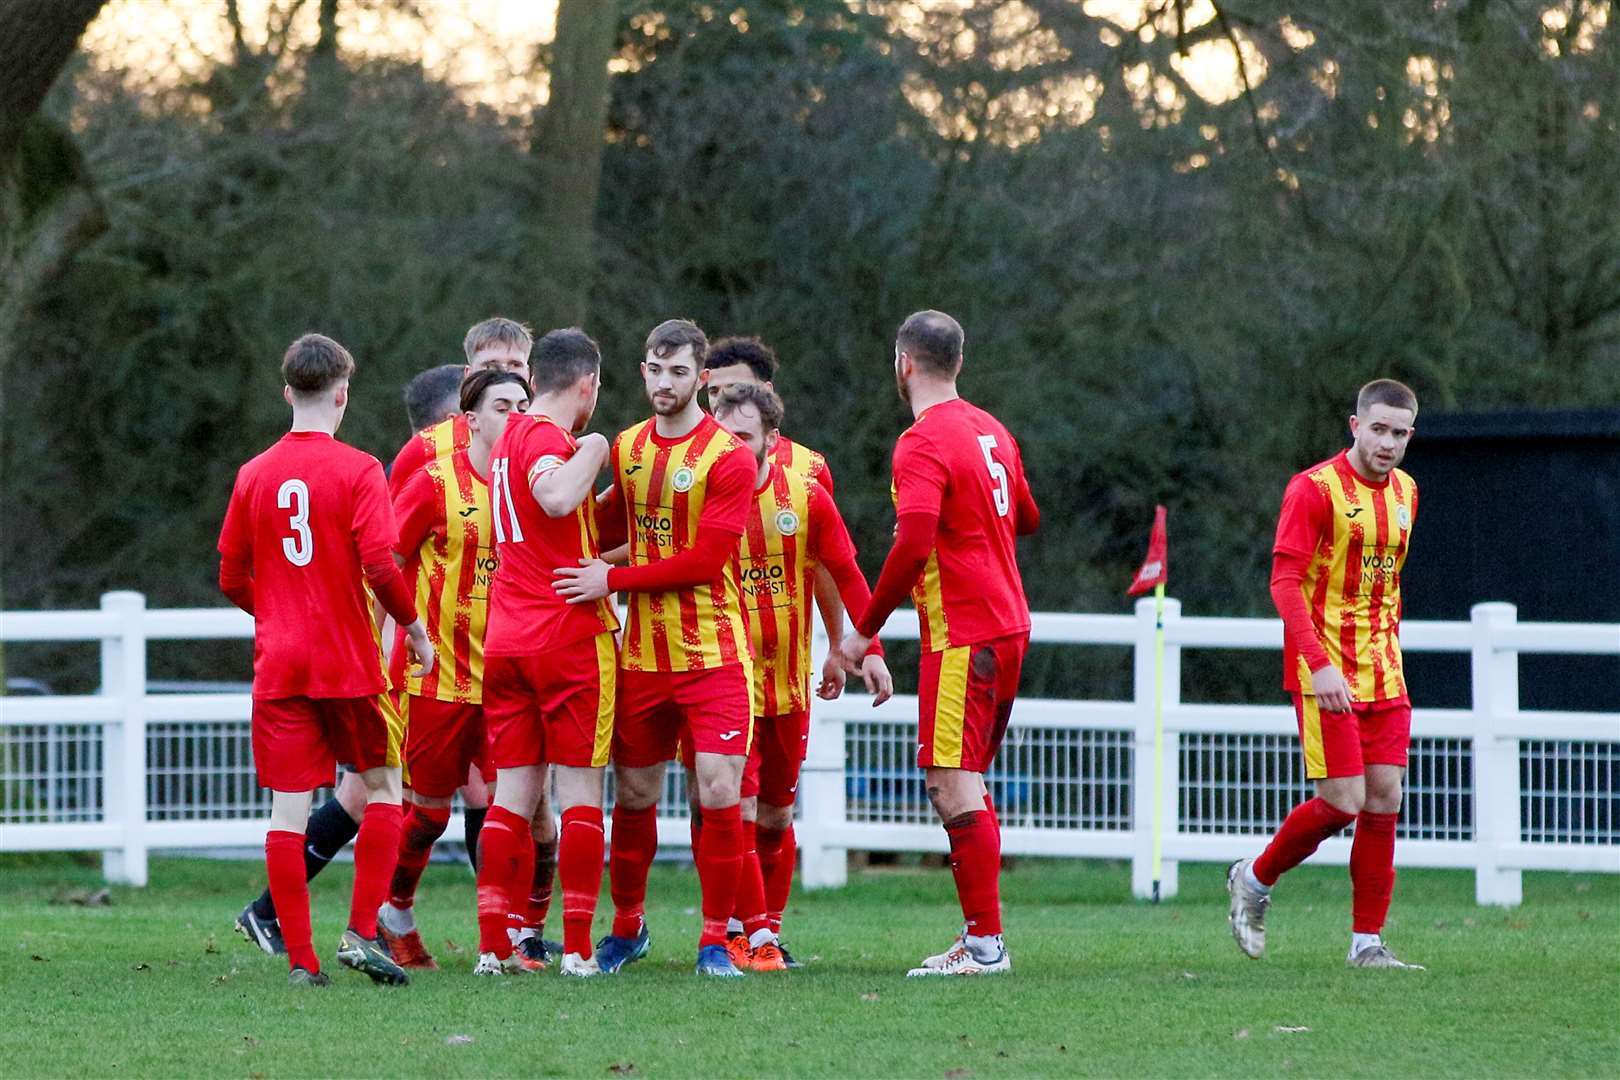 Walsham-le-Willows are hoping to make more history in the FA Vase tomorrow Picture: Mark Bullimore